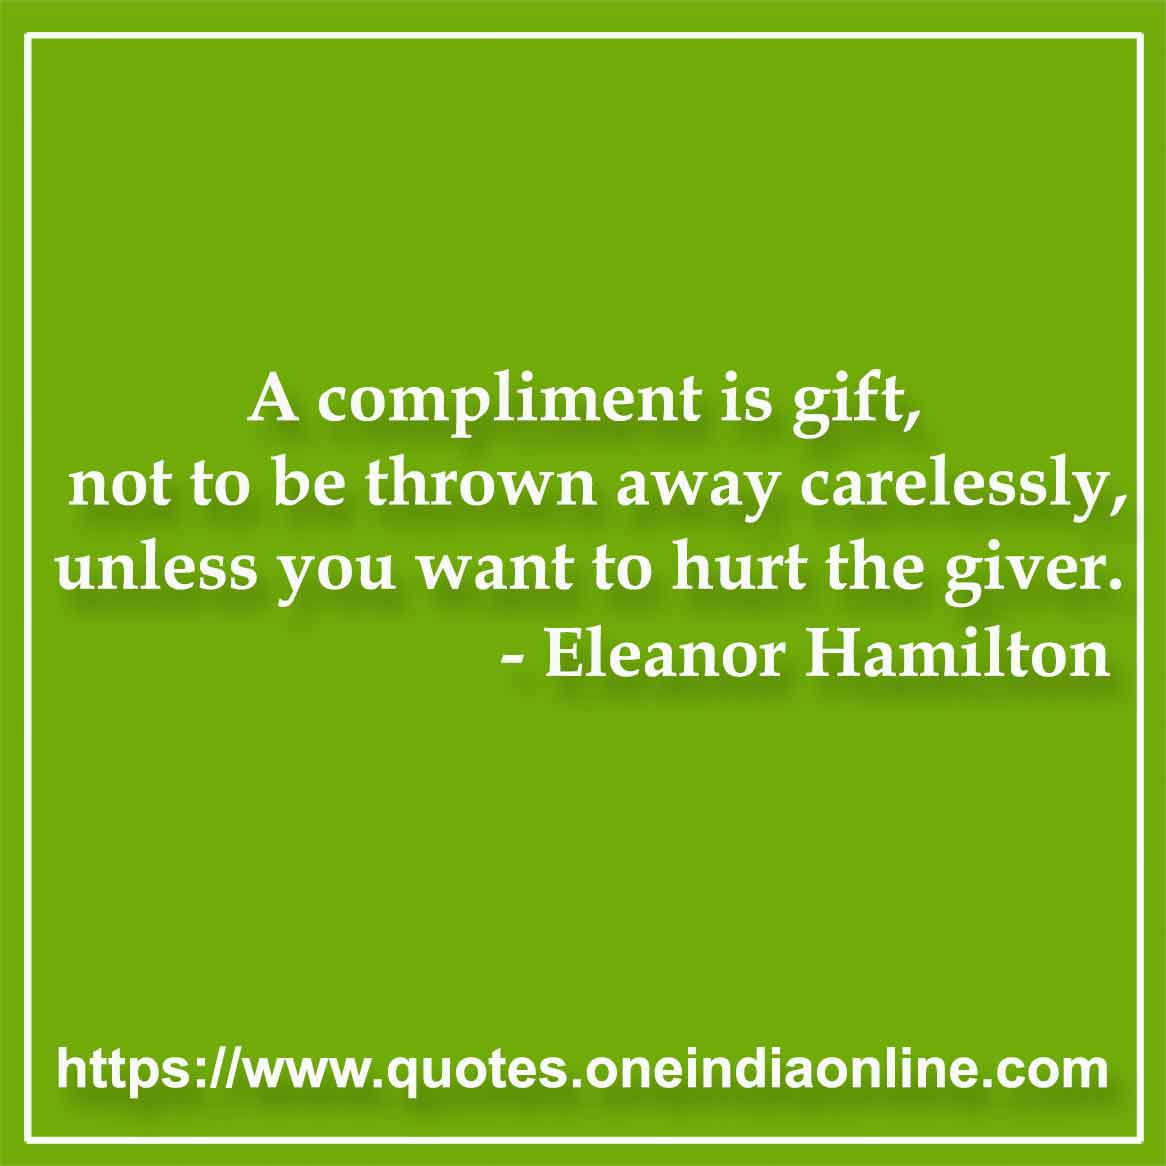 A compliment is gift, not to be thrown away carelessly, unless you want to hurt the giver. 

- Giving Quotes by Eleanor Hamilton